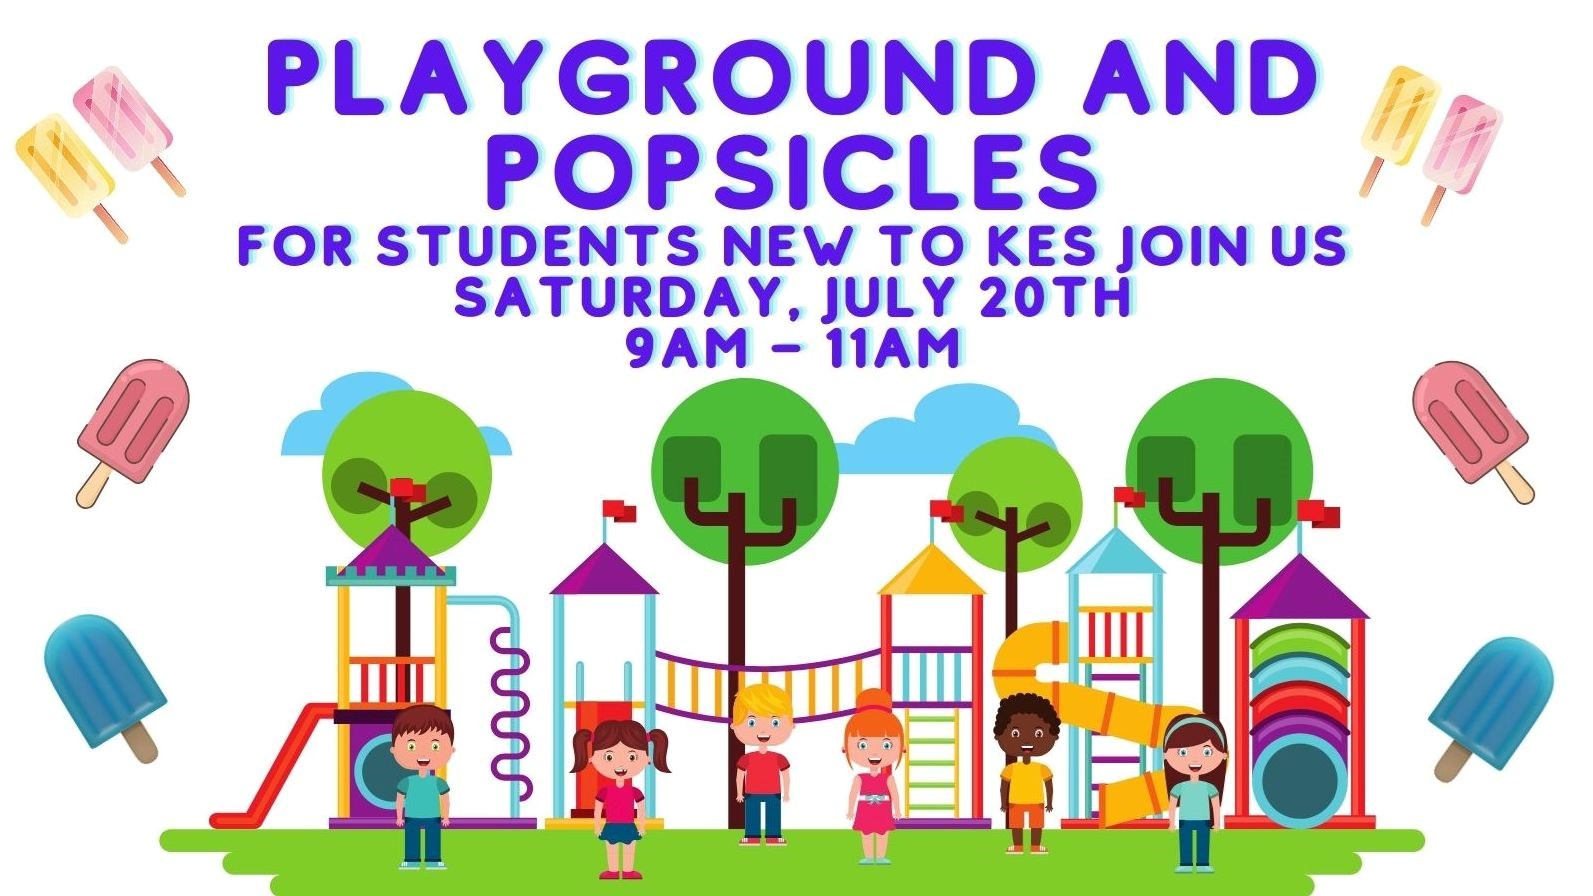 Playground and Popsicles for students new to KES join us Saturday, July 20th 9AM-11AM.